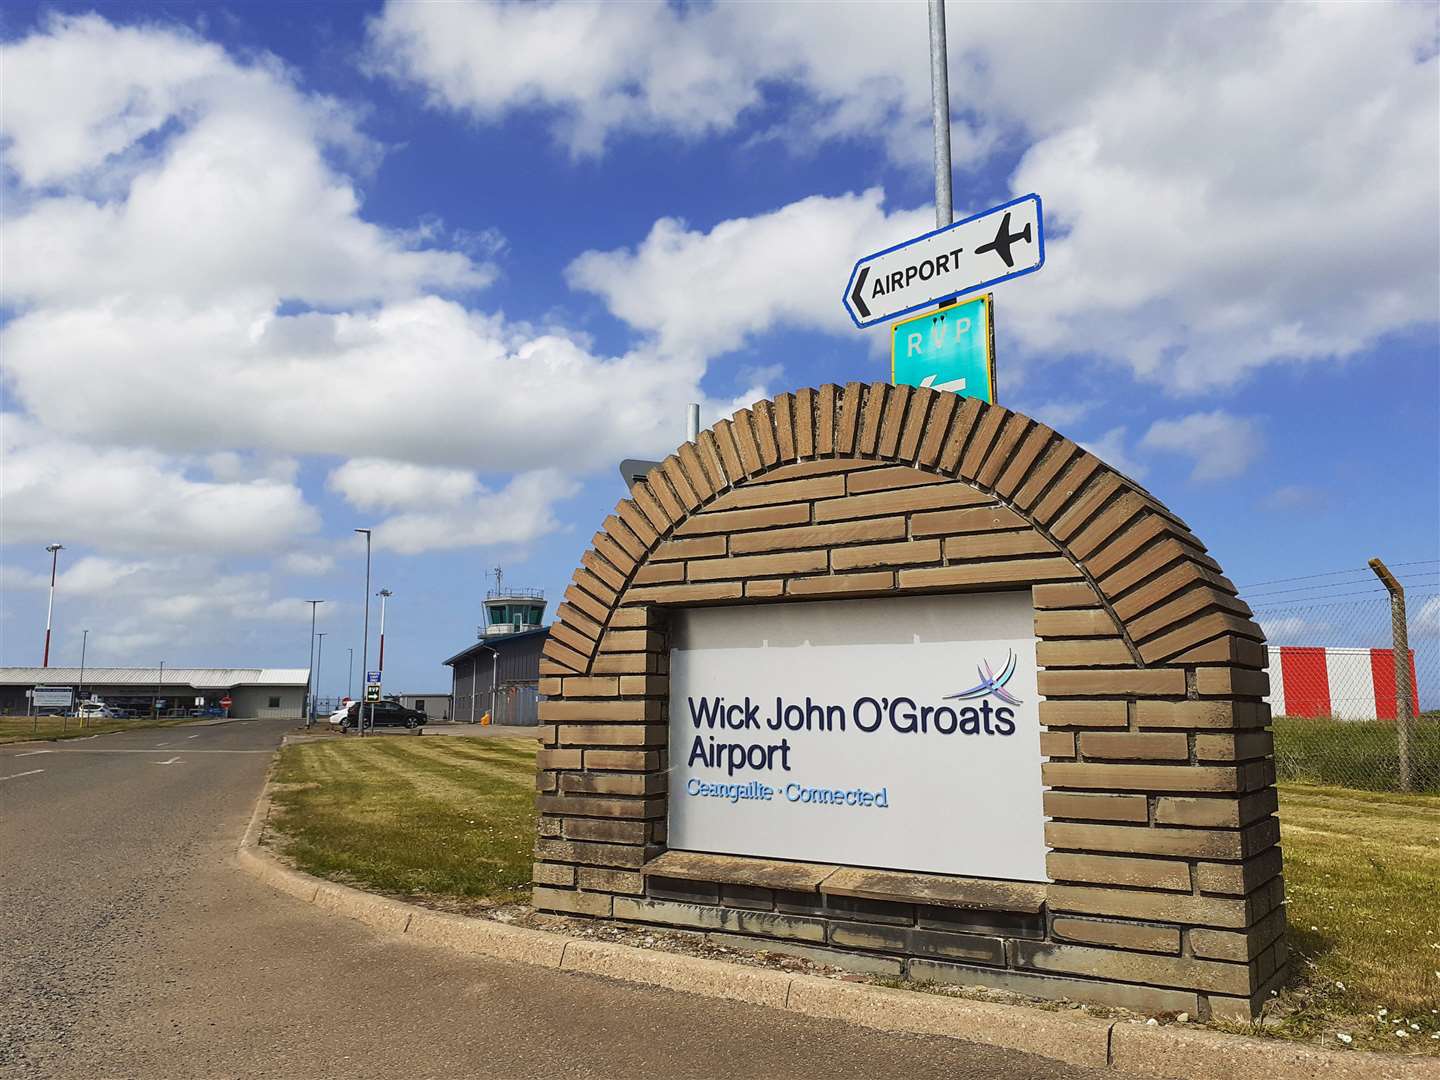 Demands are being made for a public service obligation to protect the Edinburgh and Aberdeen routes from Wick John O'Groats Airport.